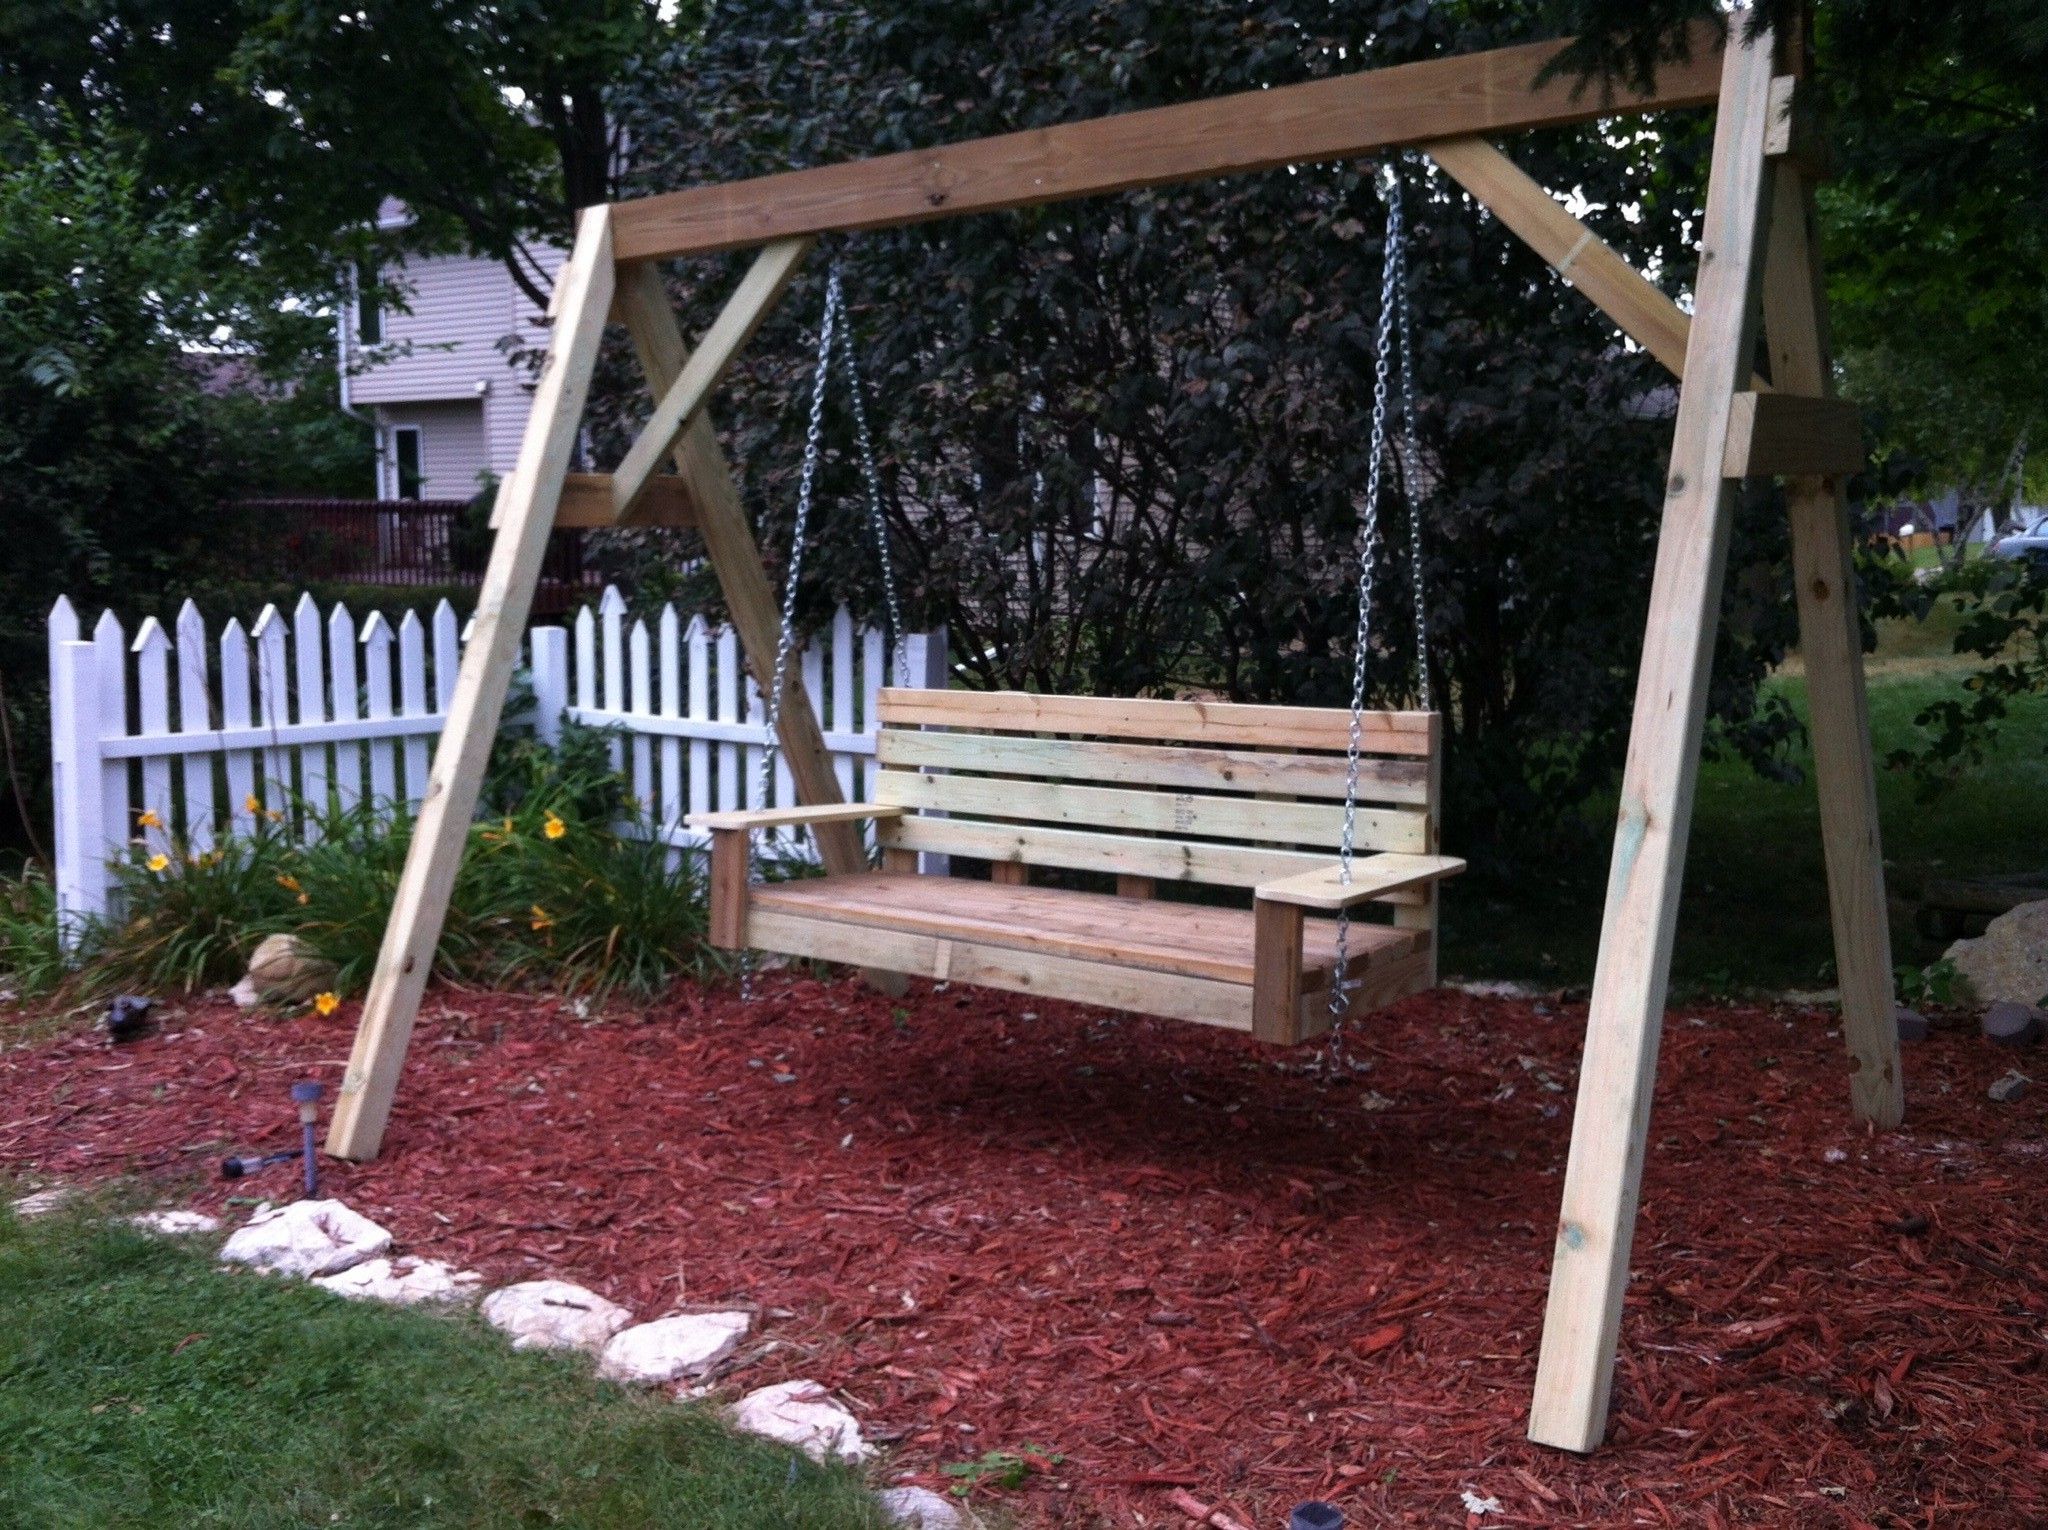 Patio Porch Swings With Stand Within Most Up To Date 39+ Elegant Diy Outdoor Swings That No One Can Resist (photo (View 21 of 25)